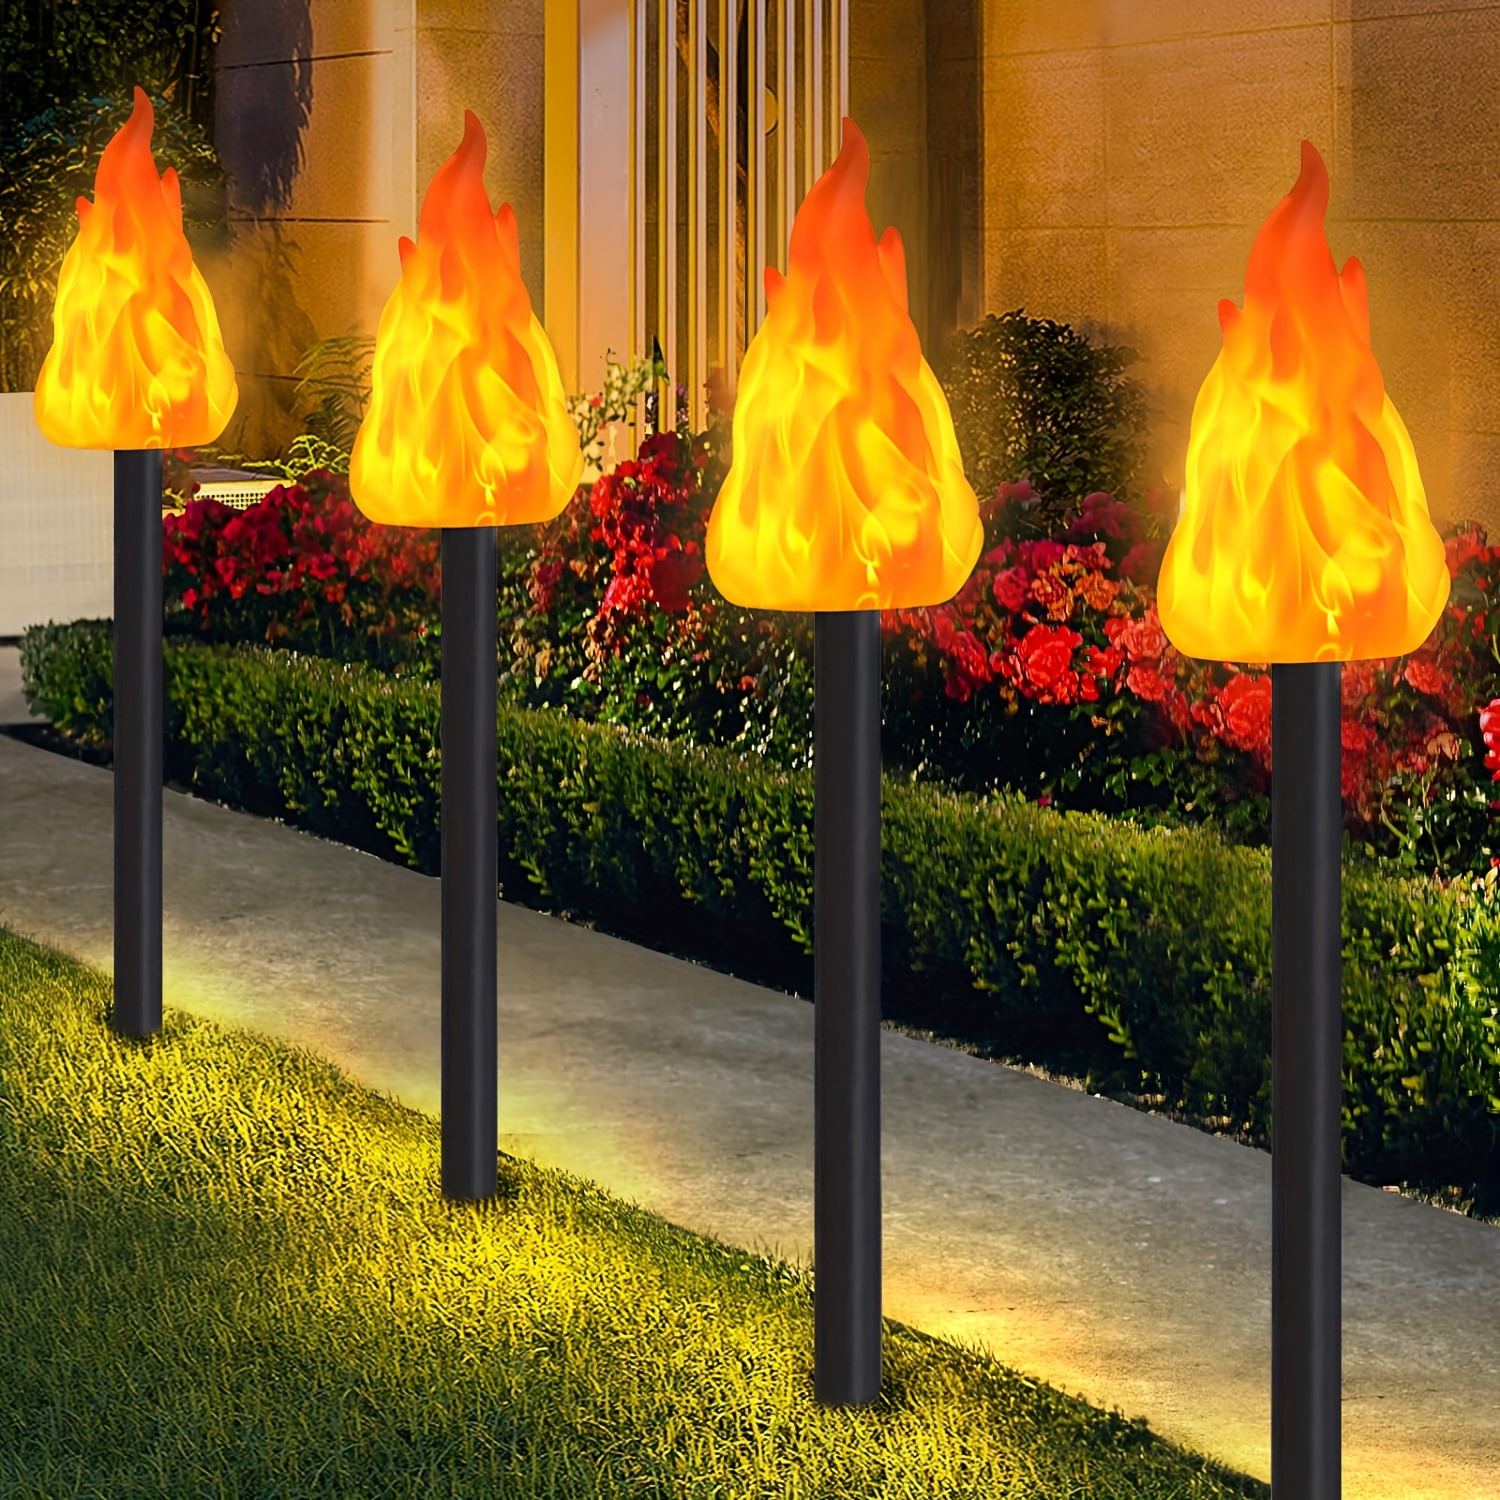 

Solar Led Flame Lights - 2/4 Piece, Flickering Torch For Outdoor Garden, Lawn & Pathway Decor | Perfect For Parties, Camping & Festive Occasions